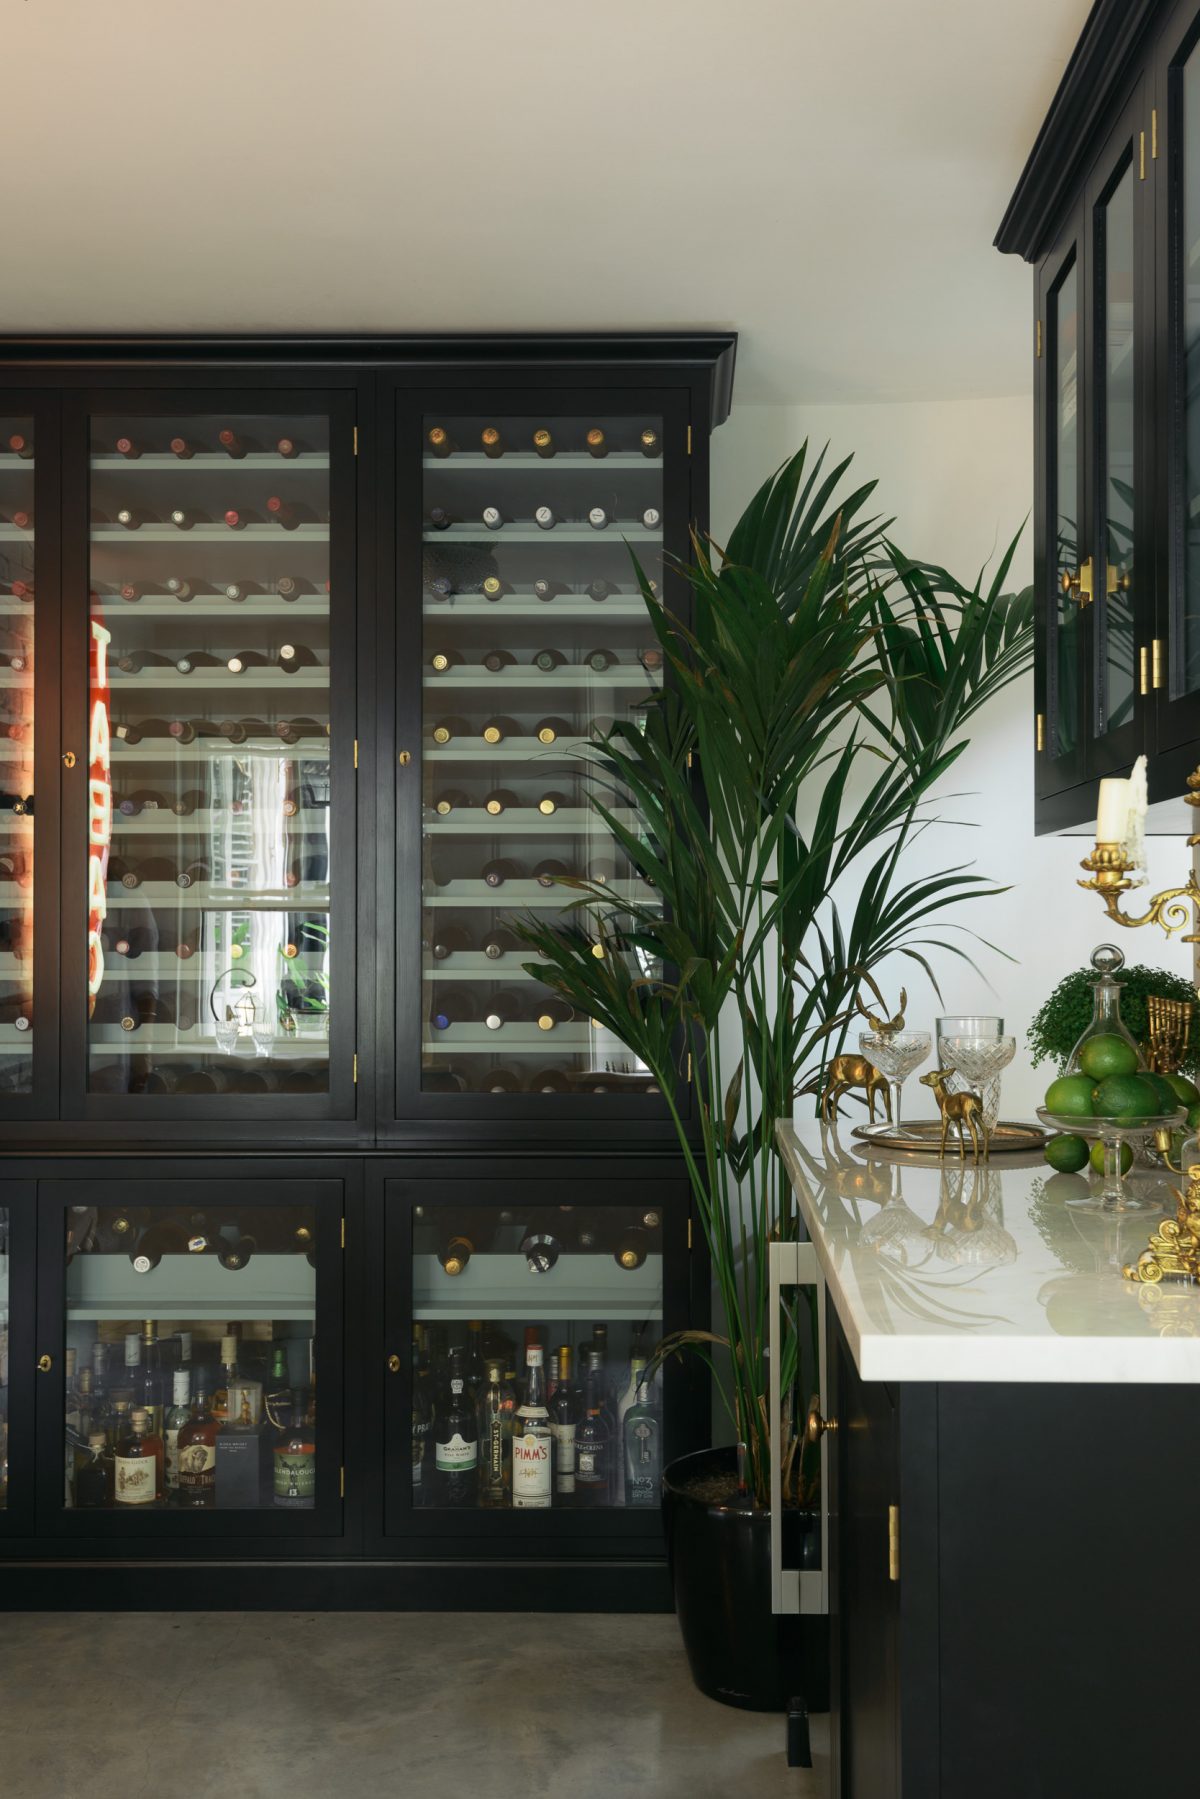 A bespoke Curiosity Cupboard has become the most beautiful wine storage solution, made to measure for this glamorous Regent's Park Cellar Bar.